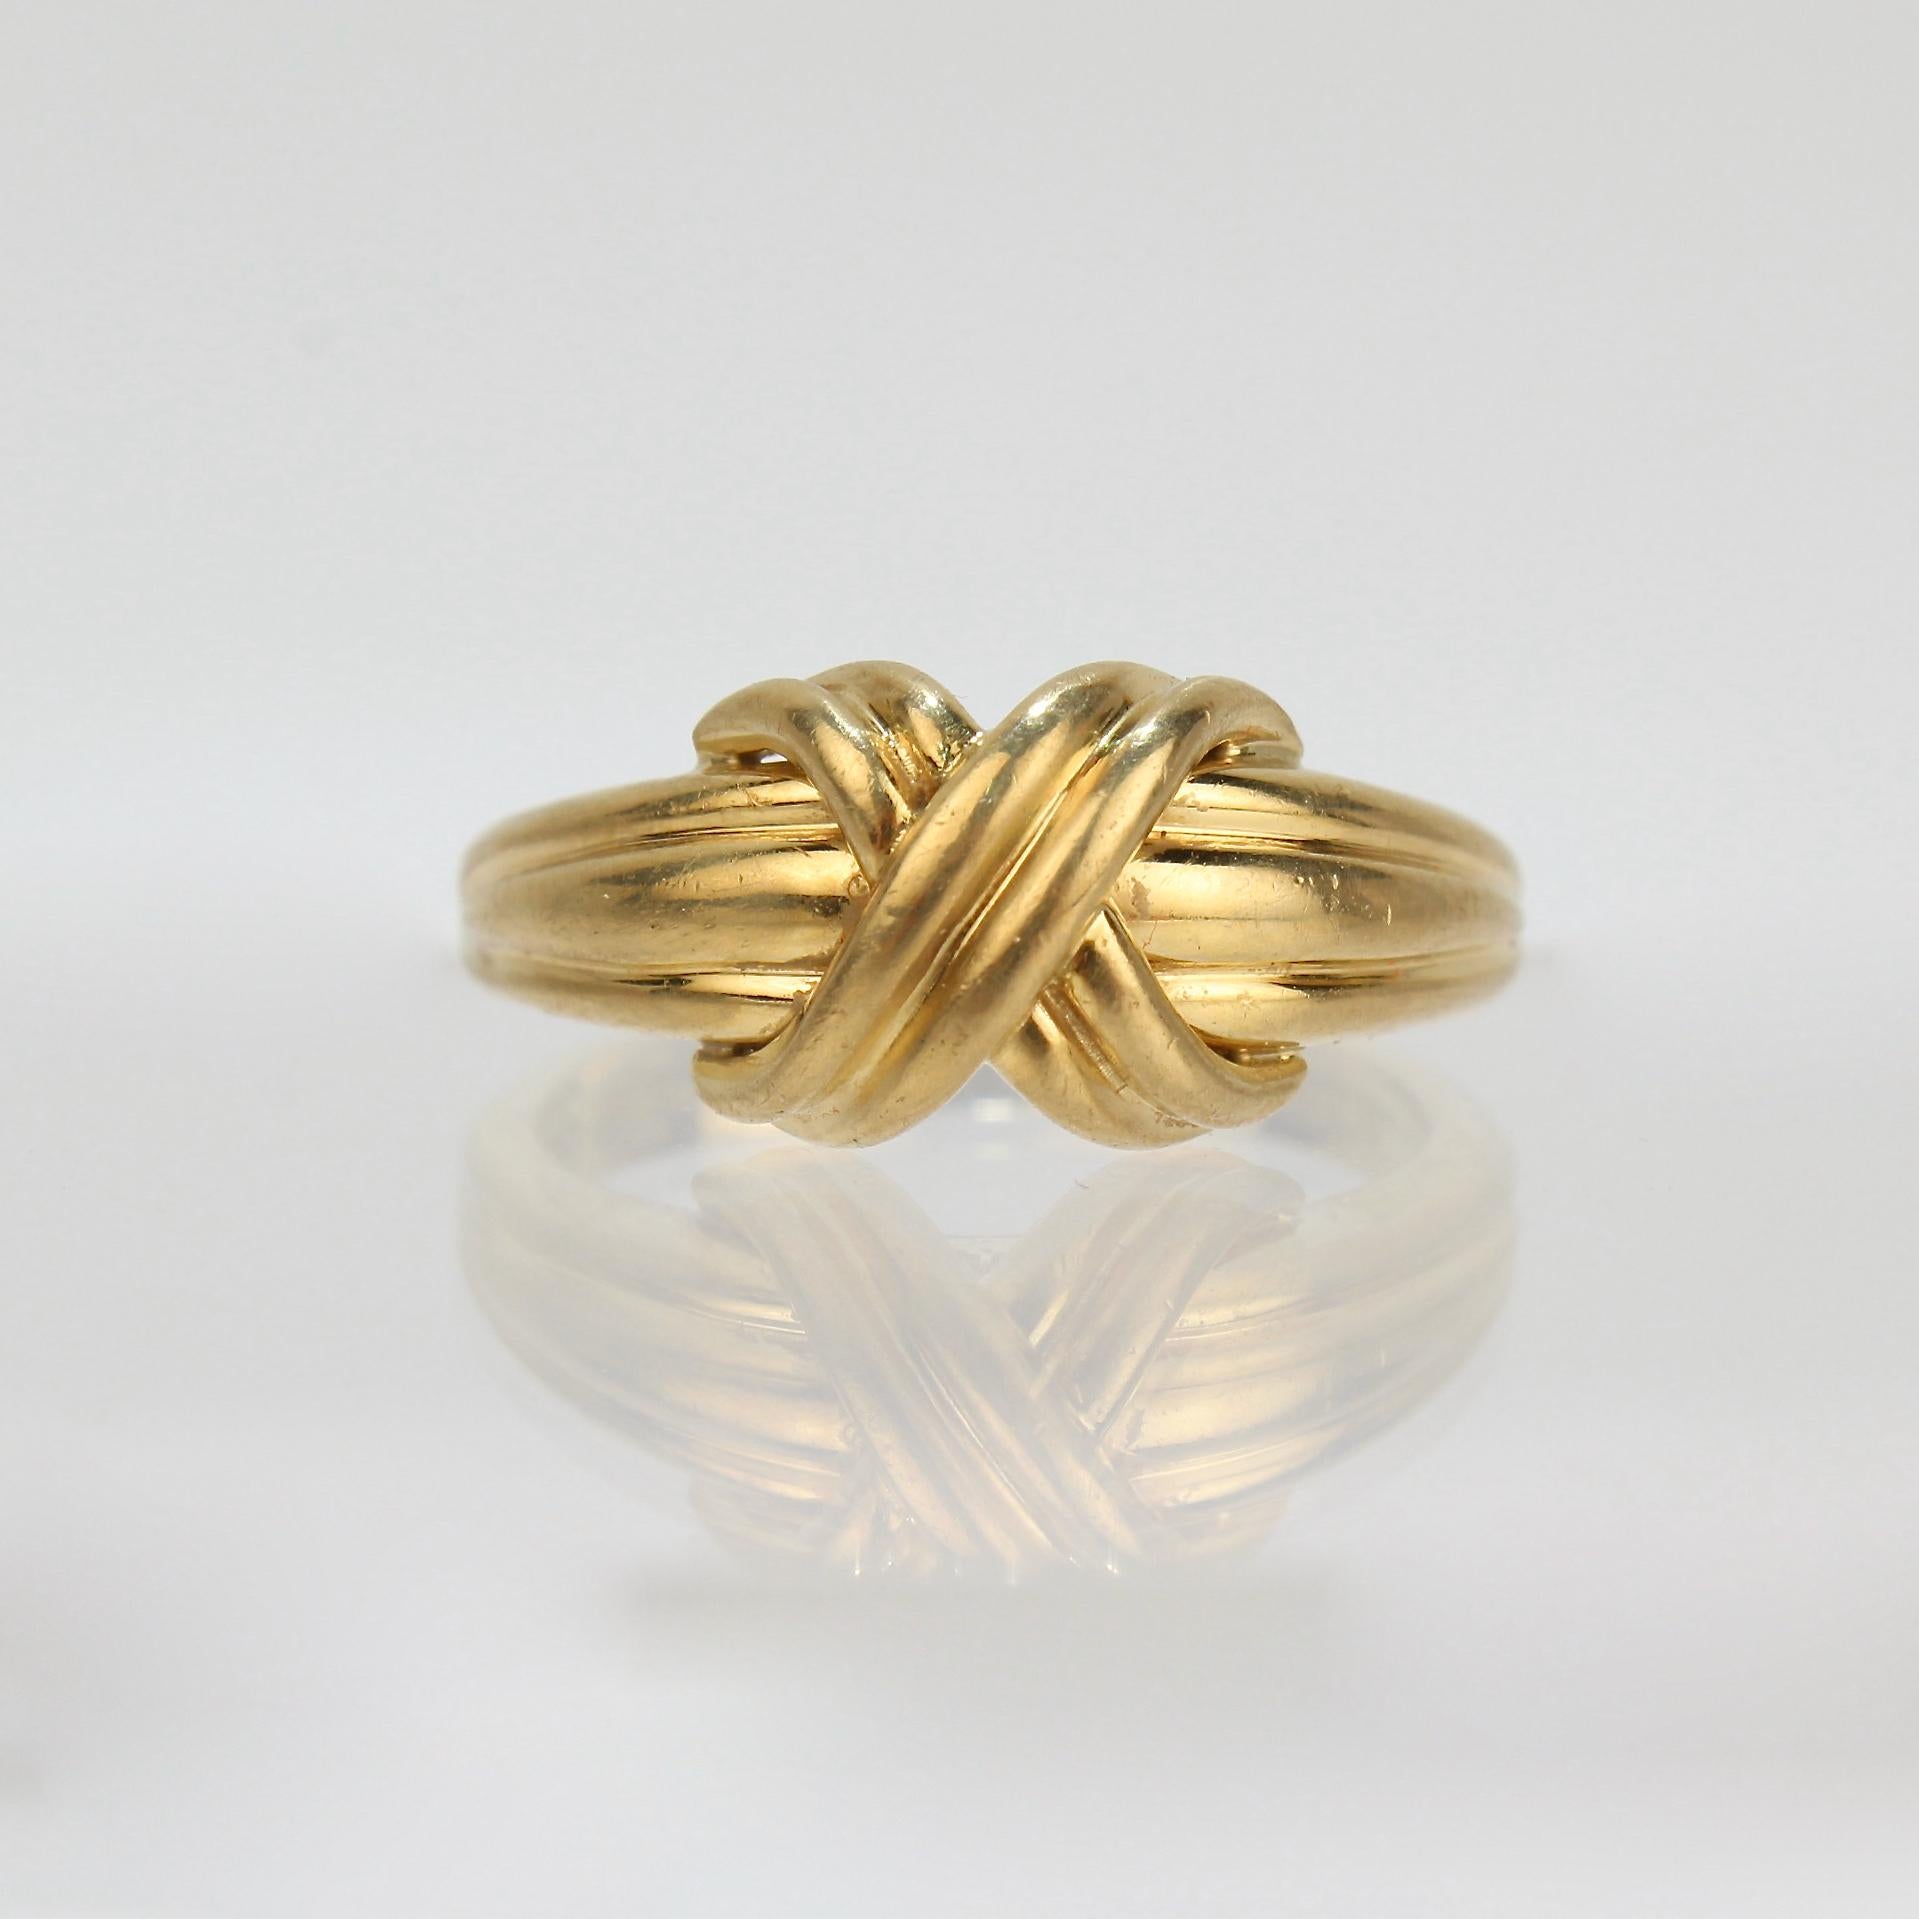 A very fine 'X' ring. 

By Tiffany & Co.

In 18k yellow gold.

Simply classic design by Tiffany & Co!

Date:
Late 20th Century

Overall Condition:
It is in overall good used estate condition with some fine & light surface scratches and other signs